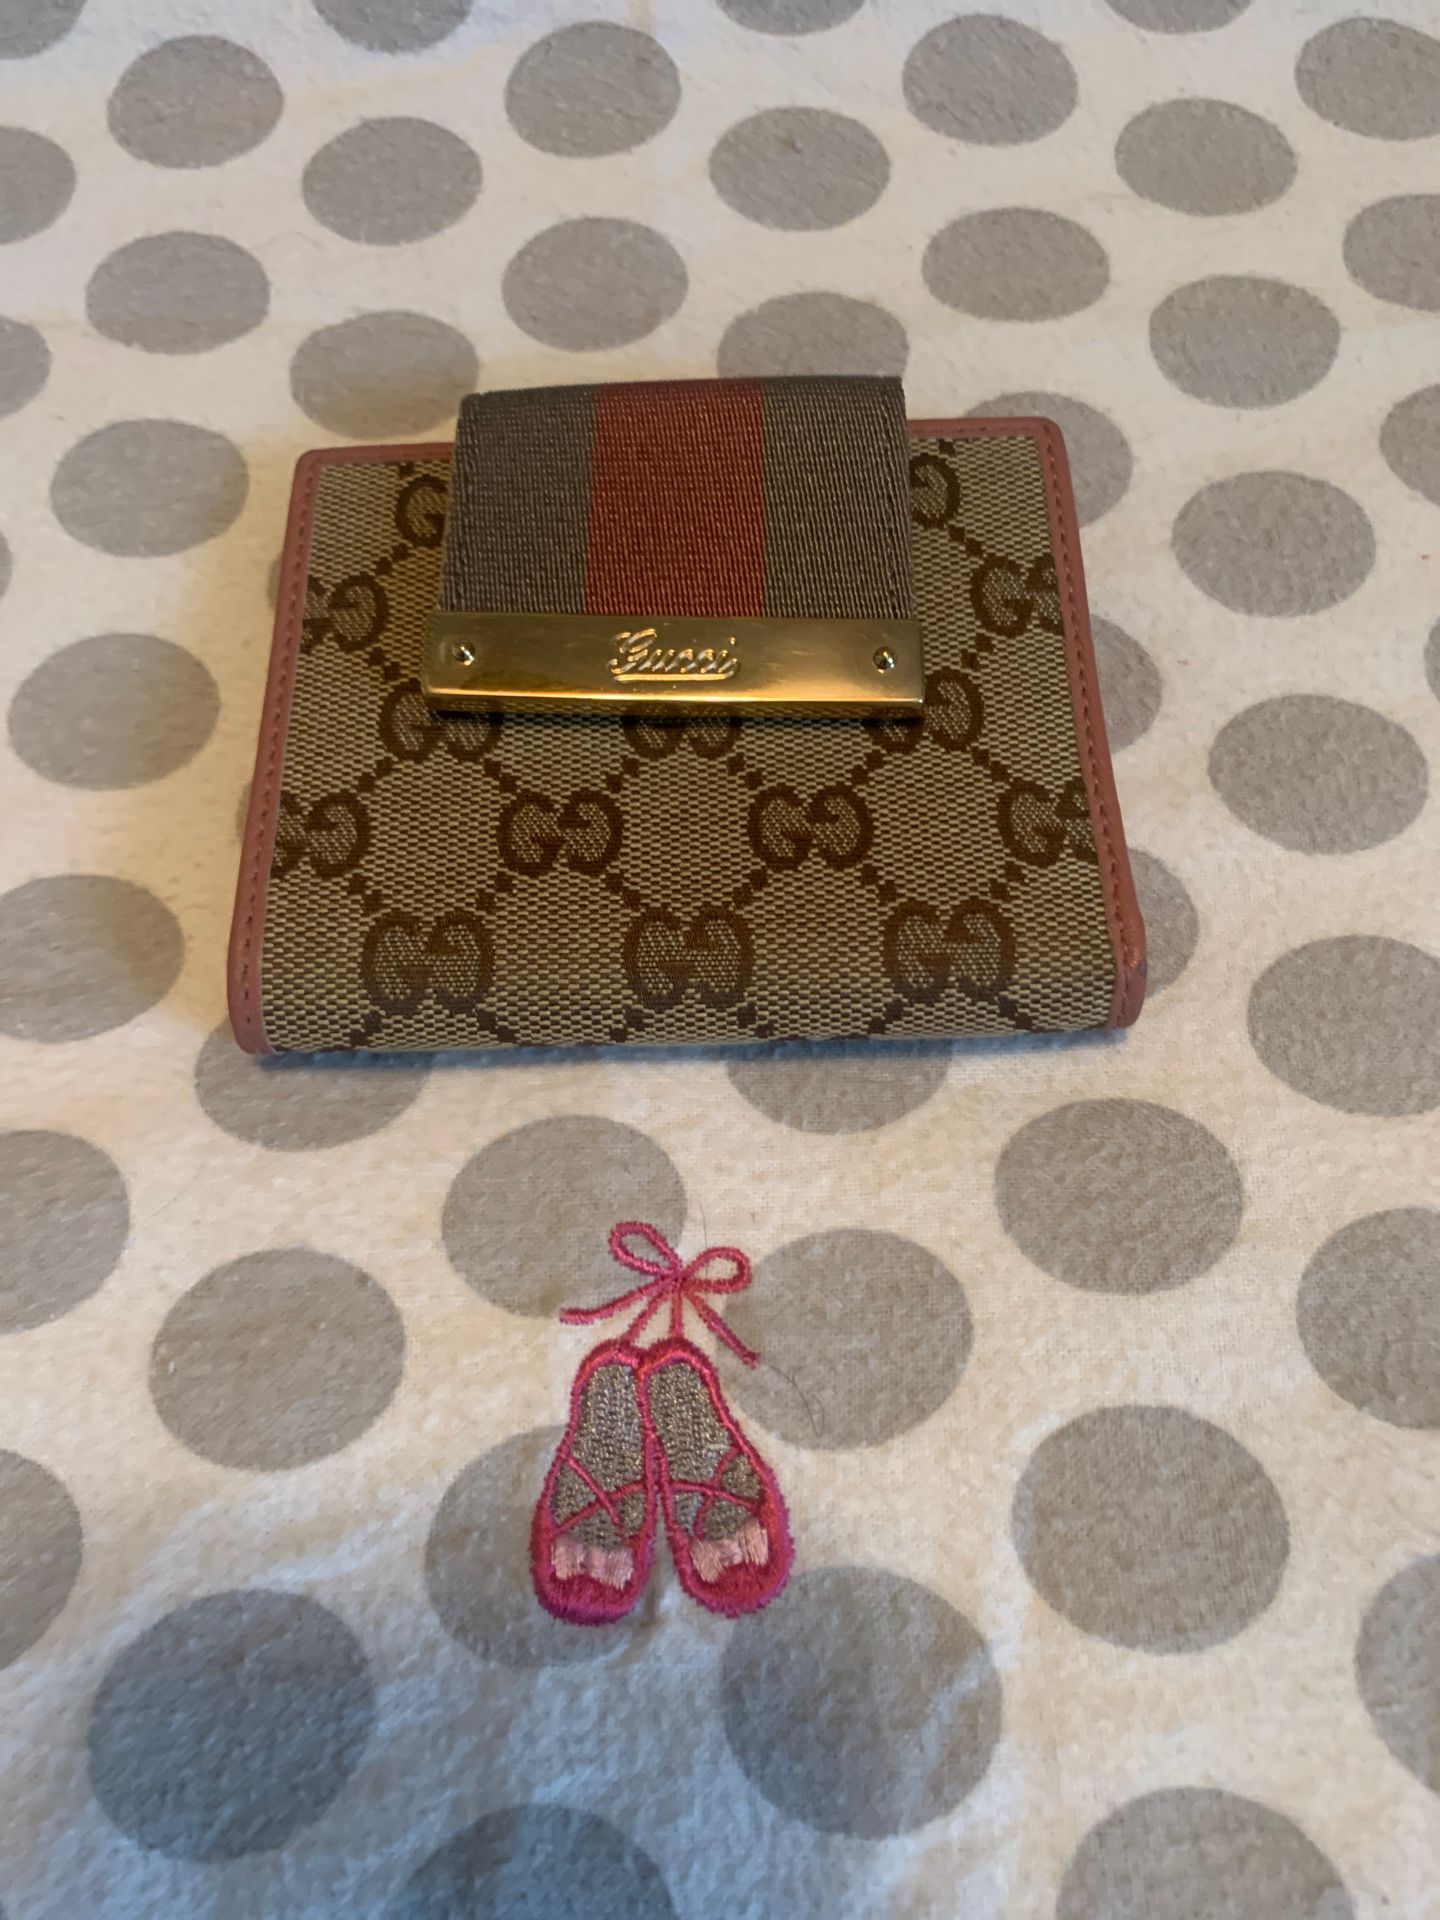 Authentic GUCCI wallet. I’ve never even used.